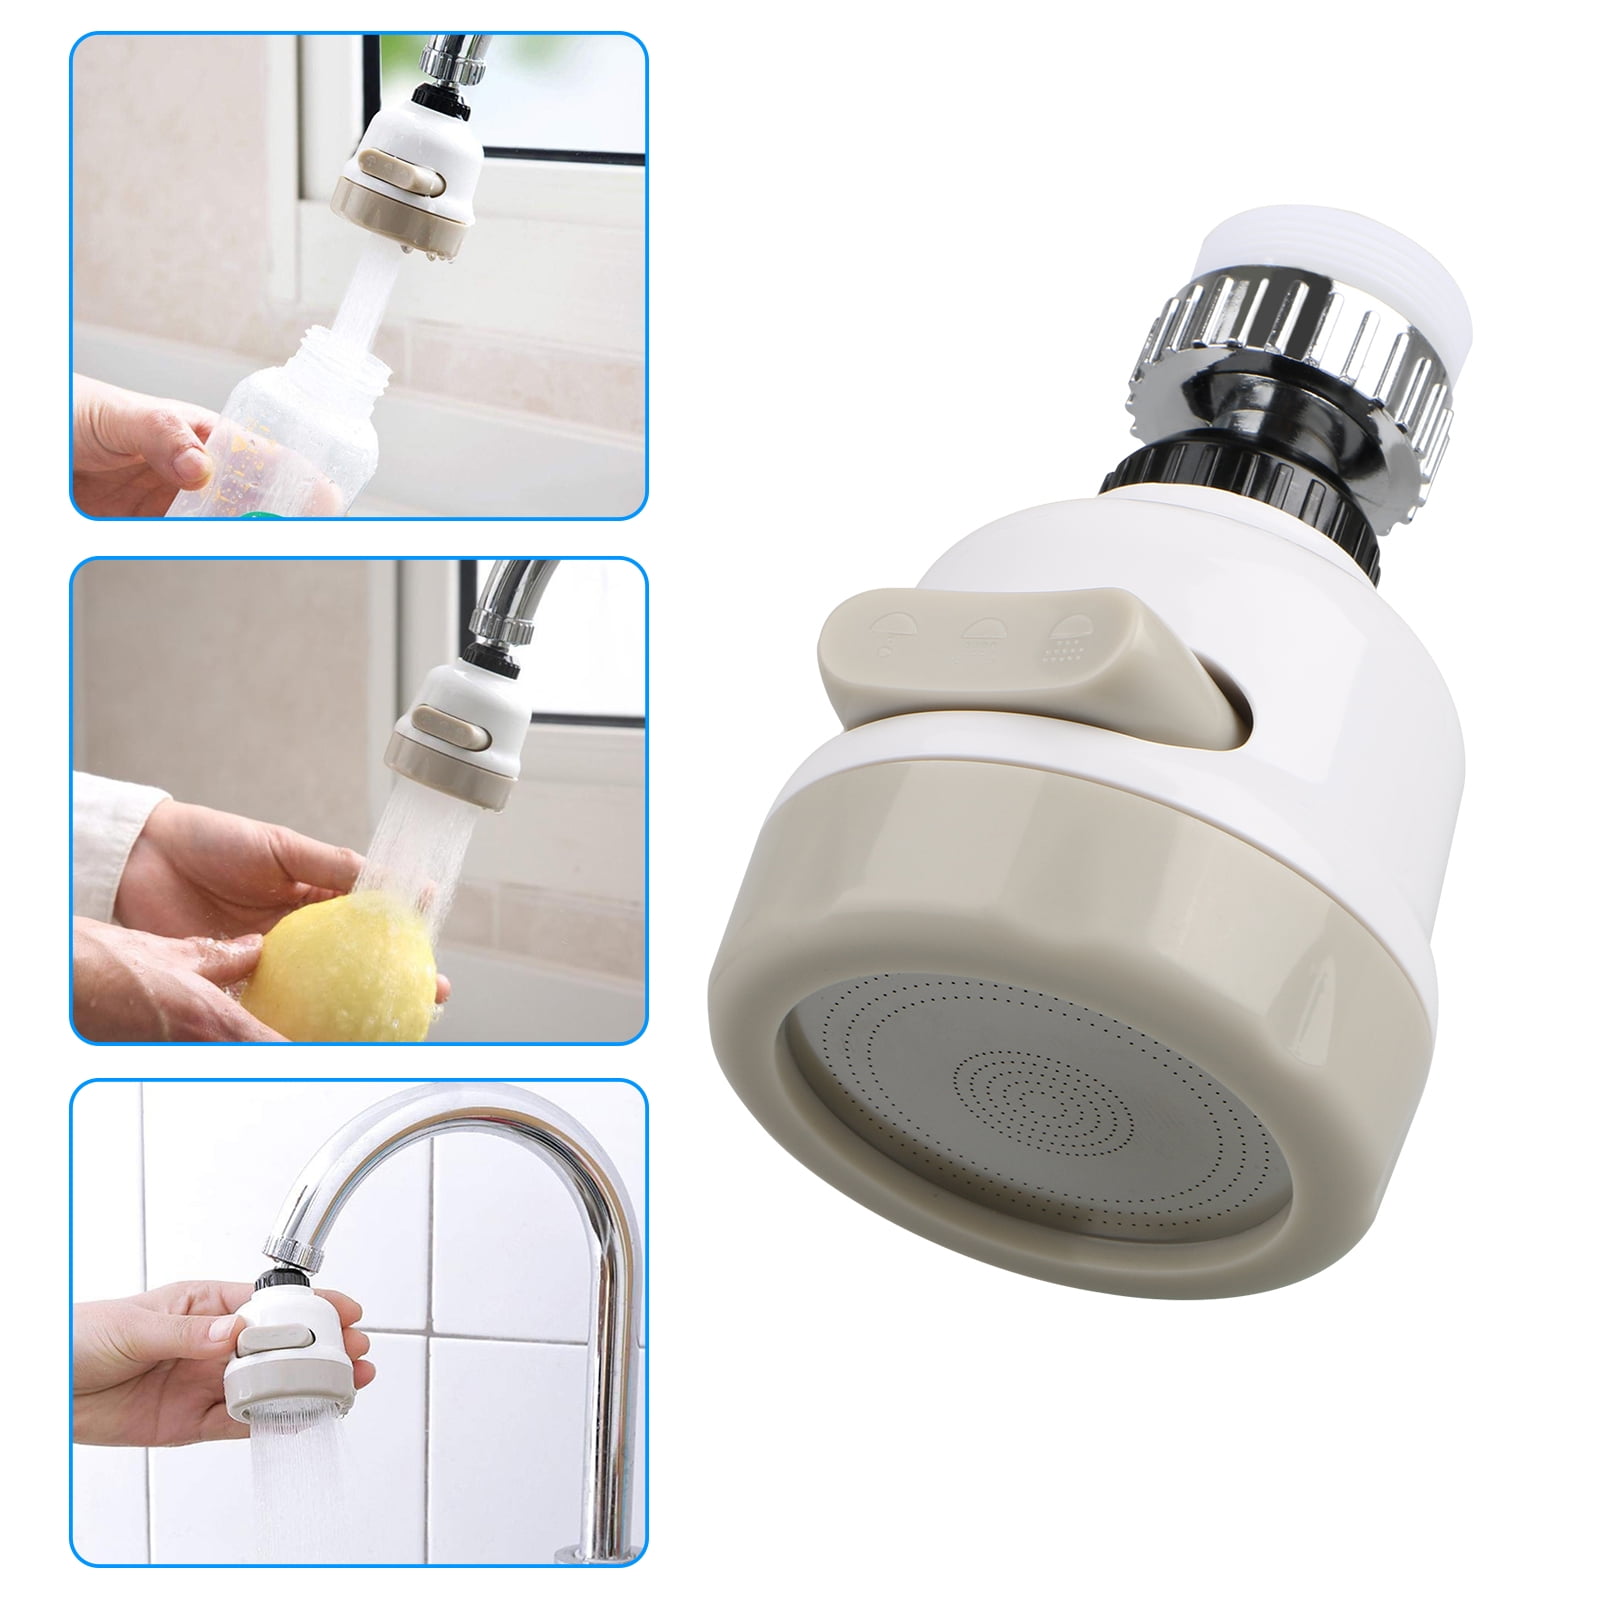 Aerator Sink Mixer Water Saving Touch Control Tap Head Swivel Tap Faucet Nozzle